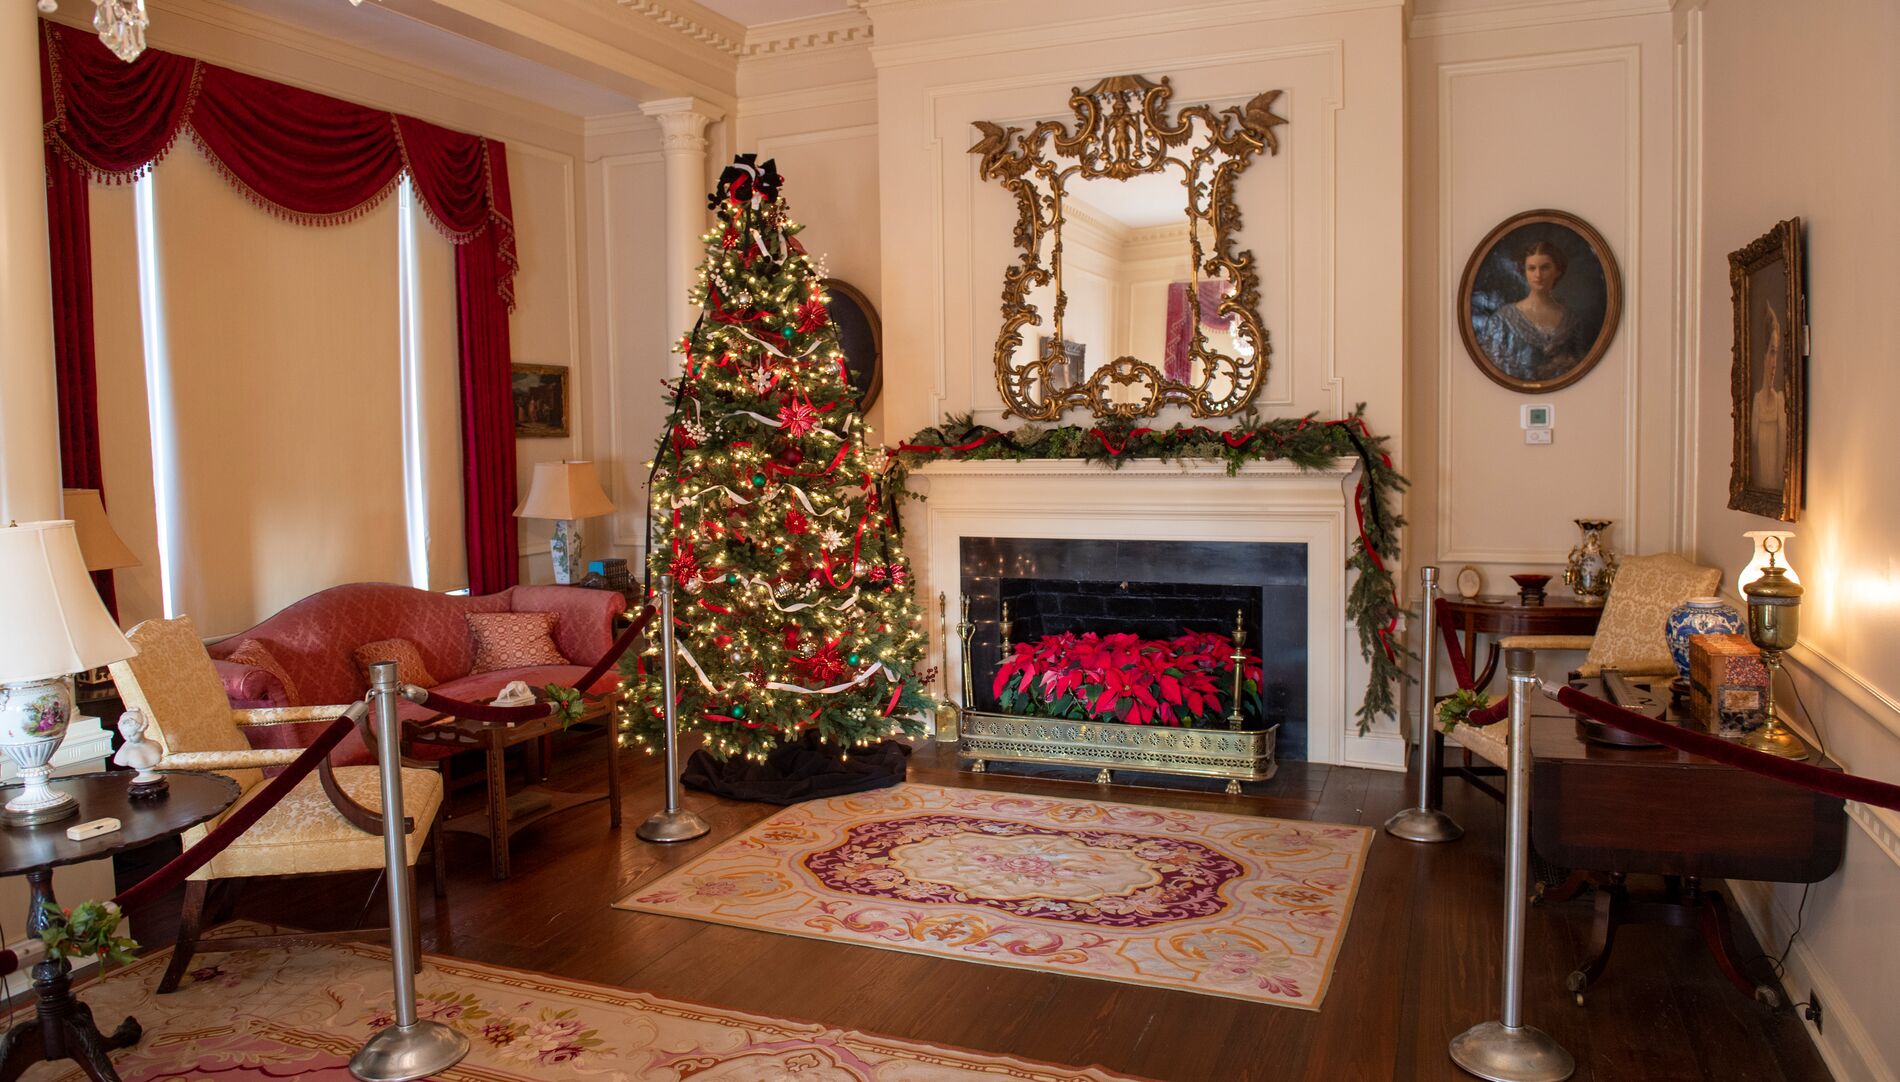             Celebrate at Oak Hill with Victorian Christmas Tours     